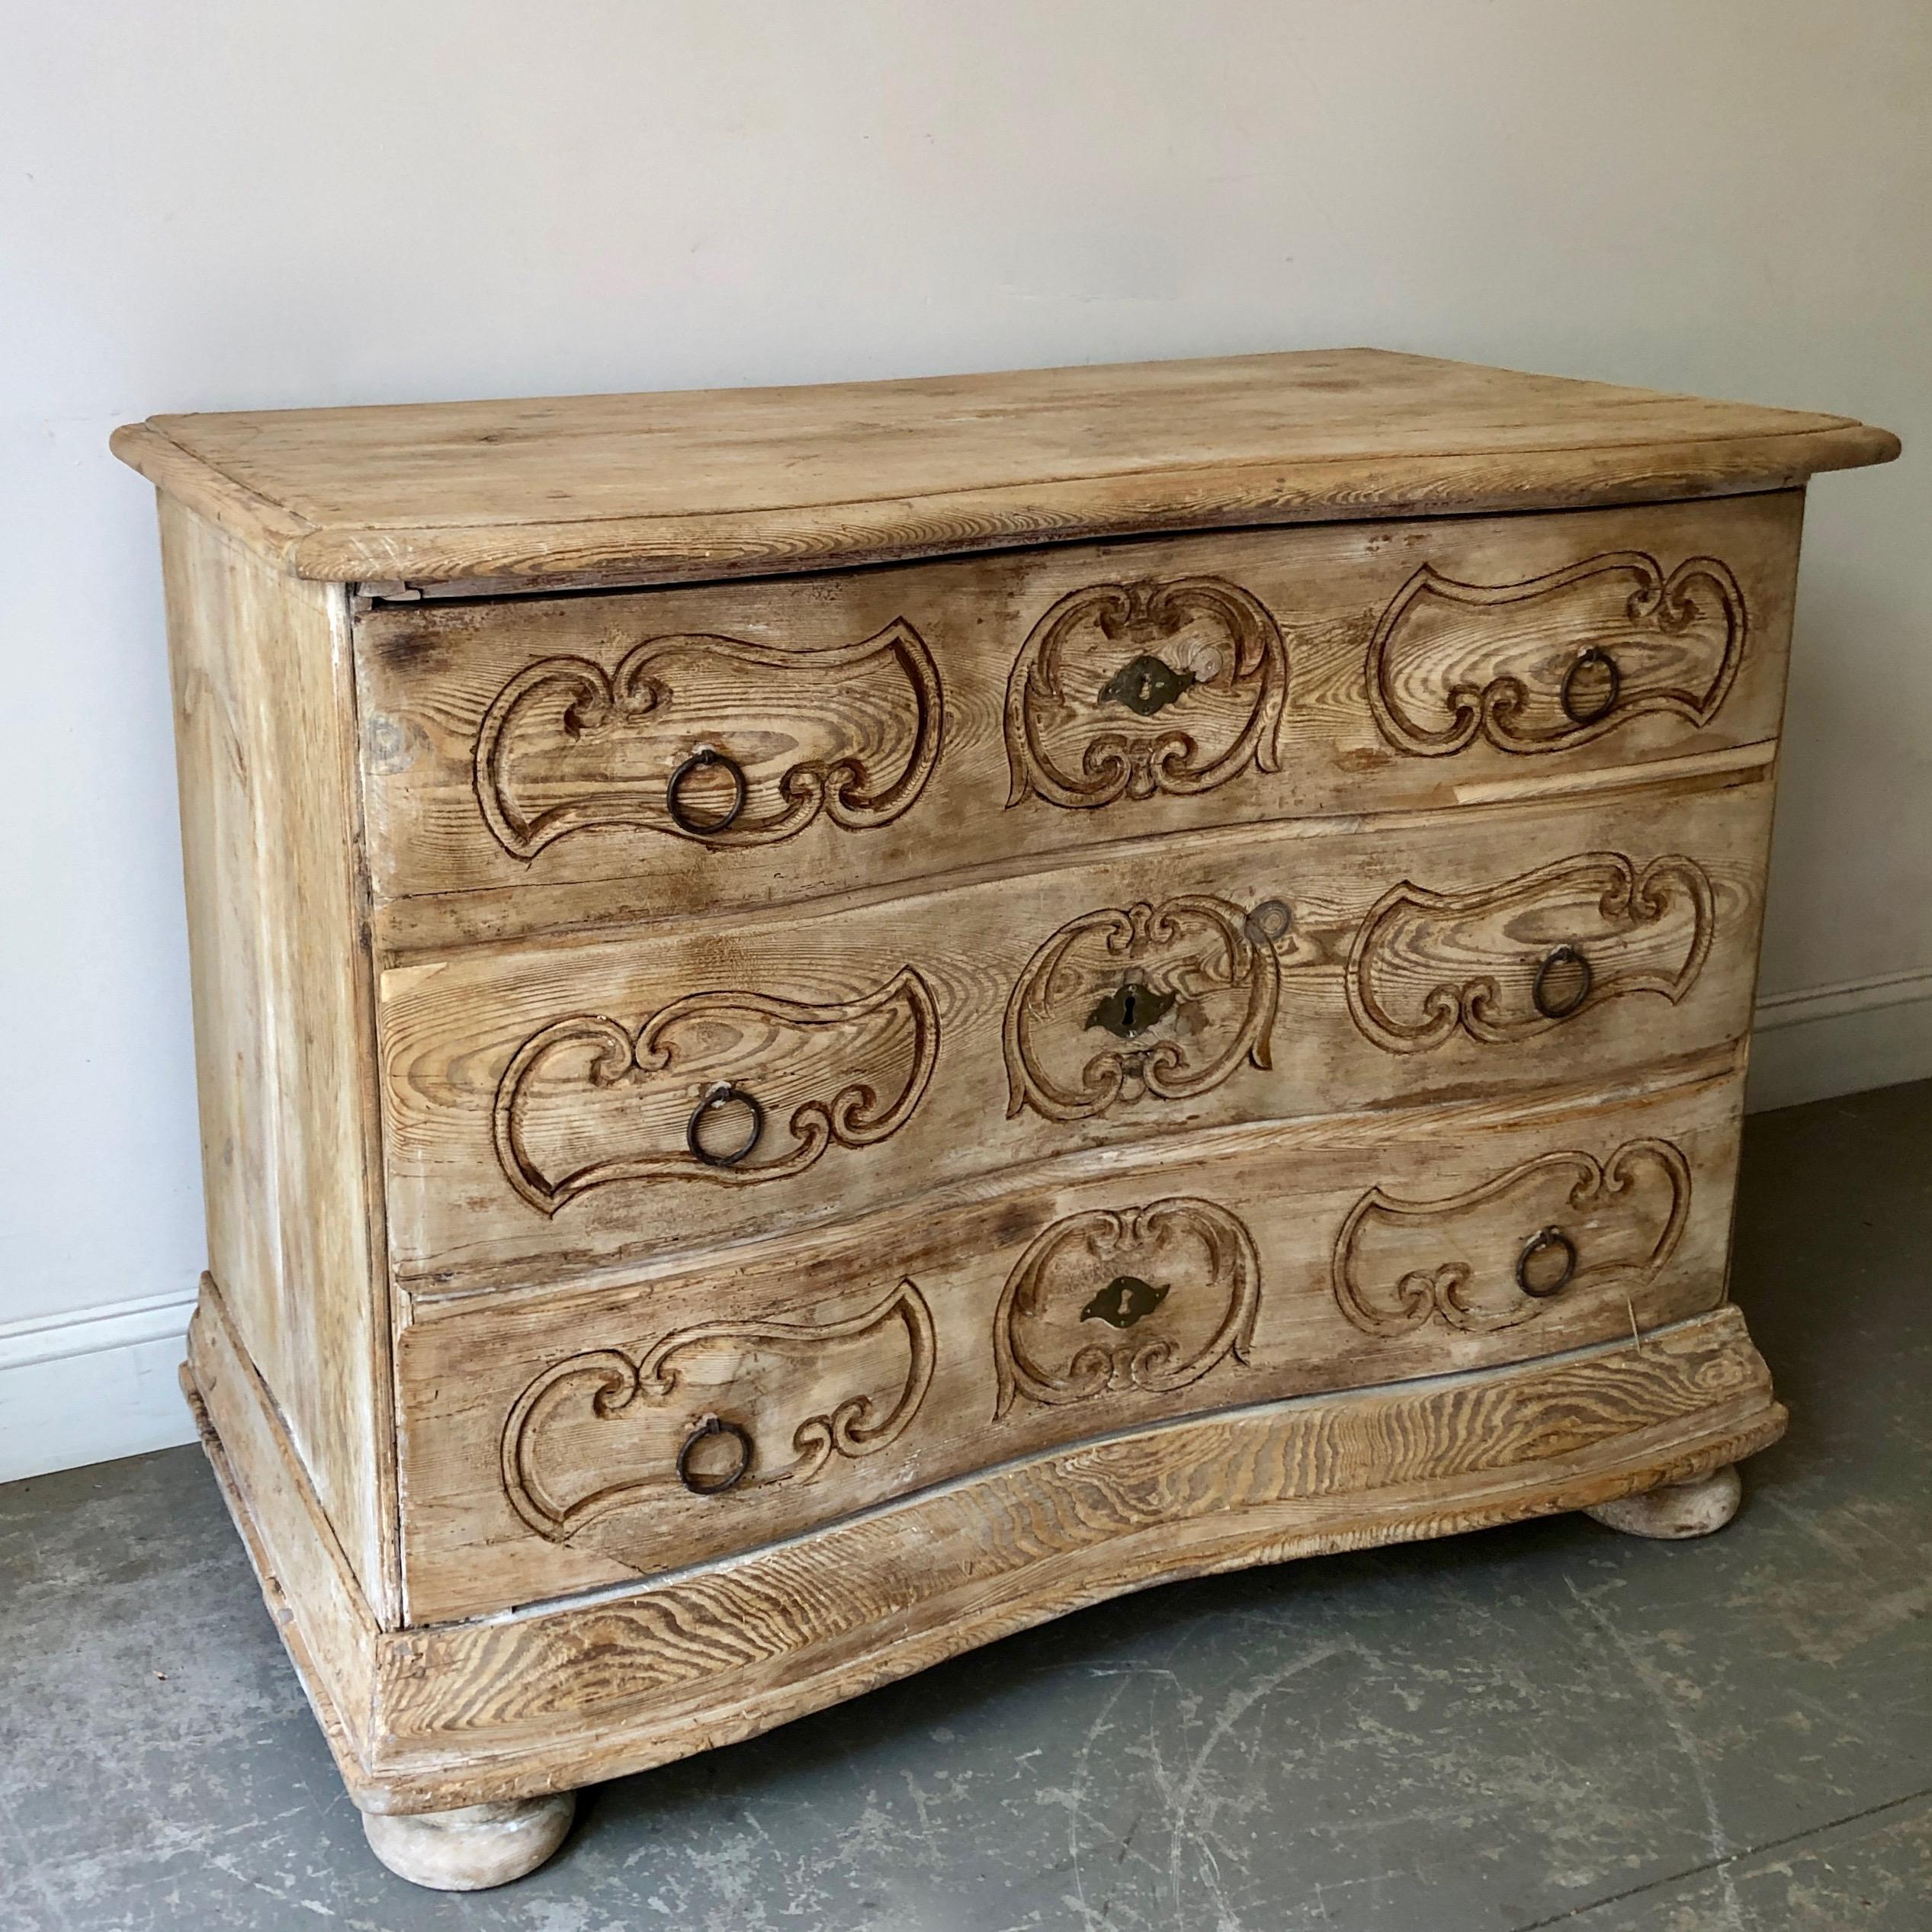 Handsome early 19th century Baroque style bleached chest of drawers with serpentine shaped richly carved drawer fronts on ball feet.
Alsace circa 1840.
More than ever, we selected the best, the rarest, the unusual, the spectacular, the most